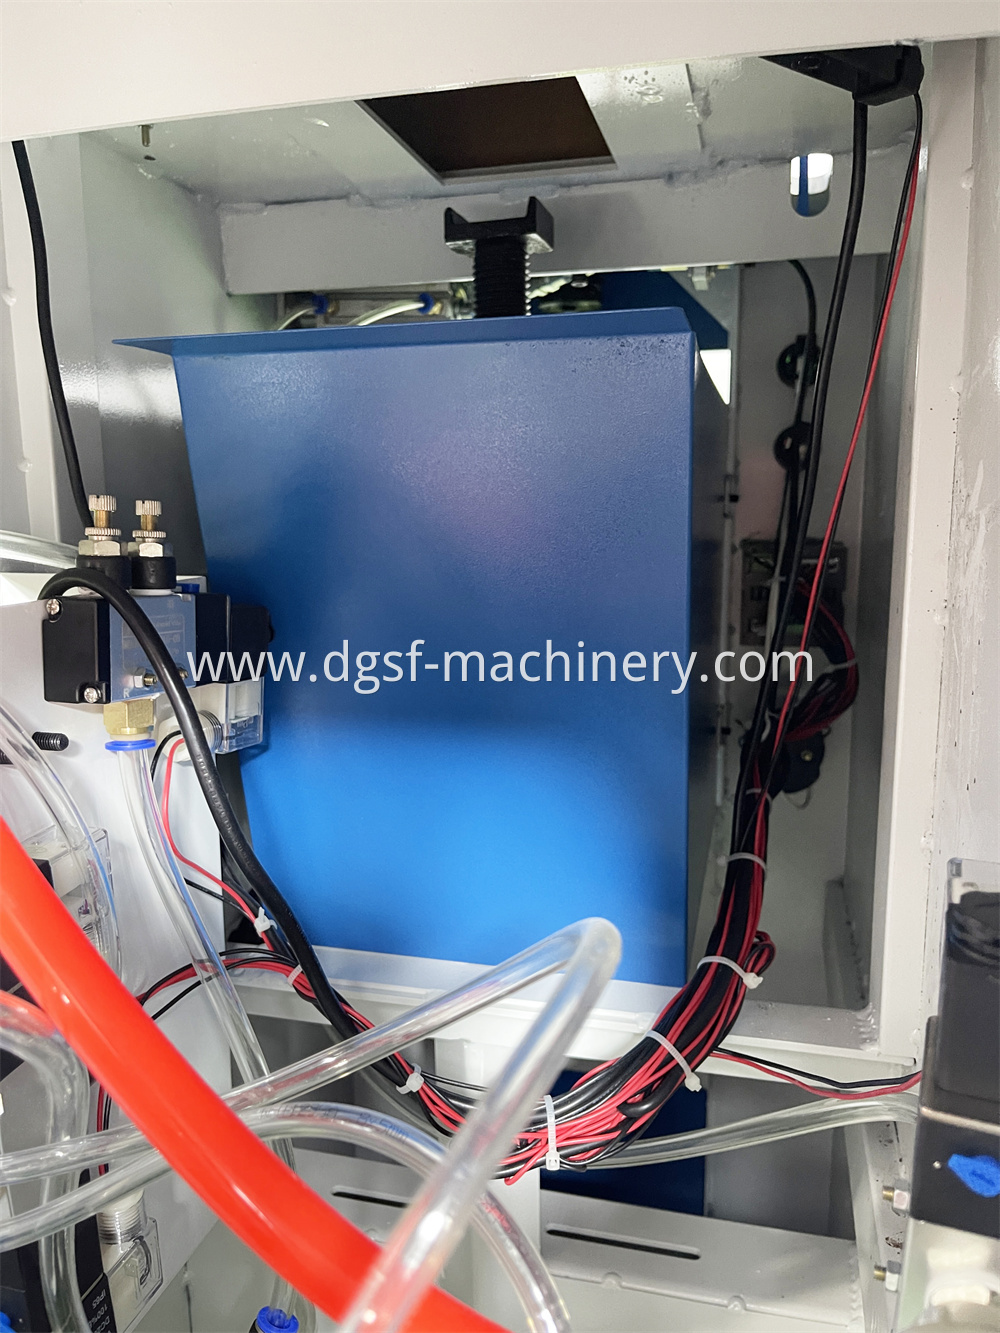 Automatic Cover Type Pneumatic Sole Attatching Machine Dg 706a 8 Jpg